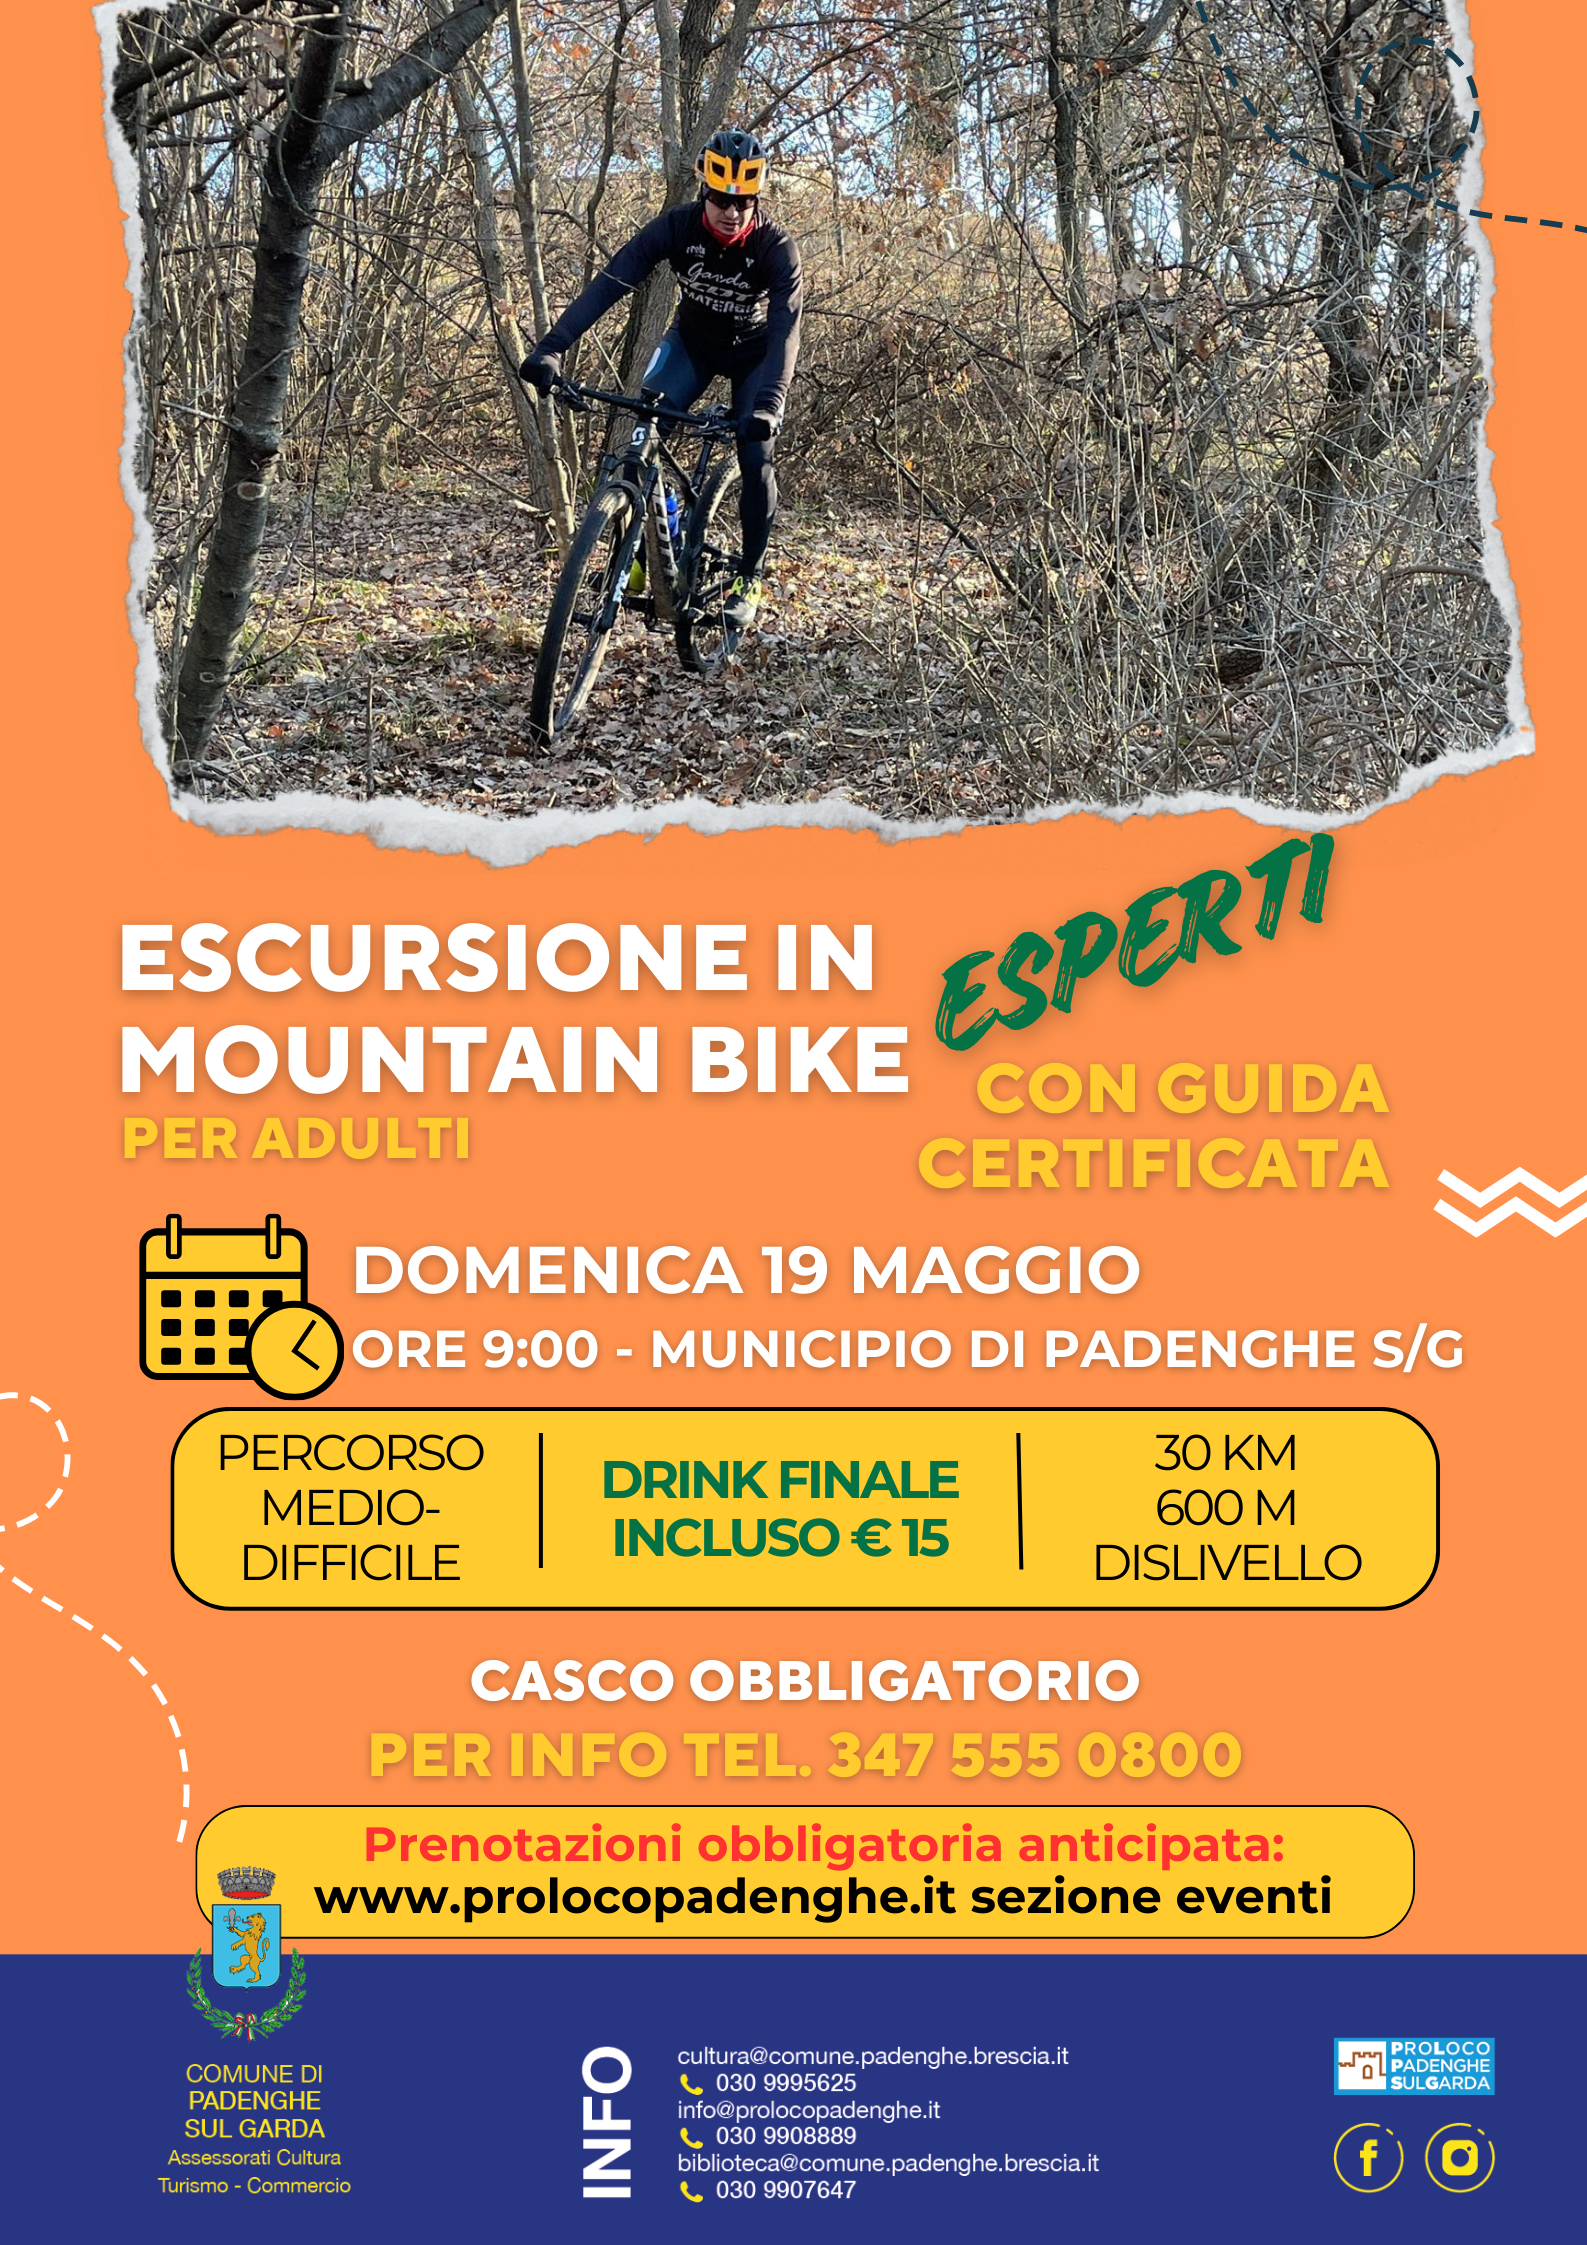 MOUNTAIN BIKE EXCURSION FOR EXPERTS 19th MAY